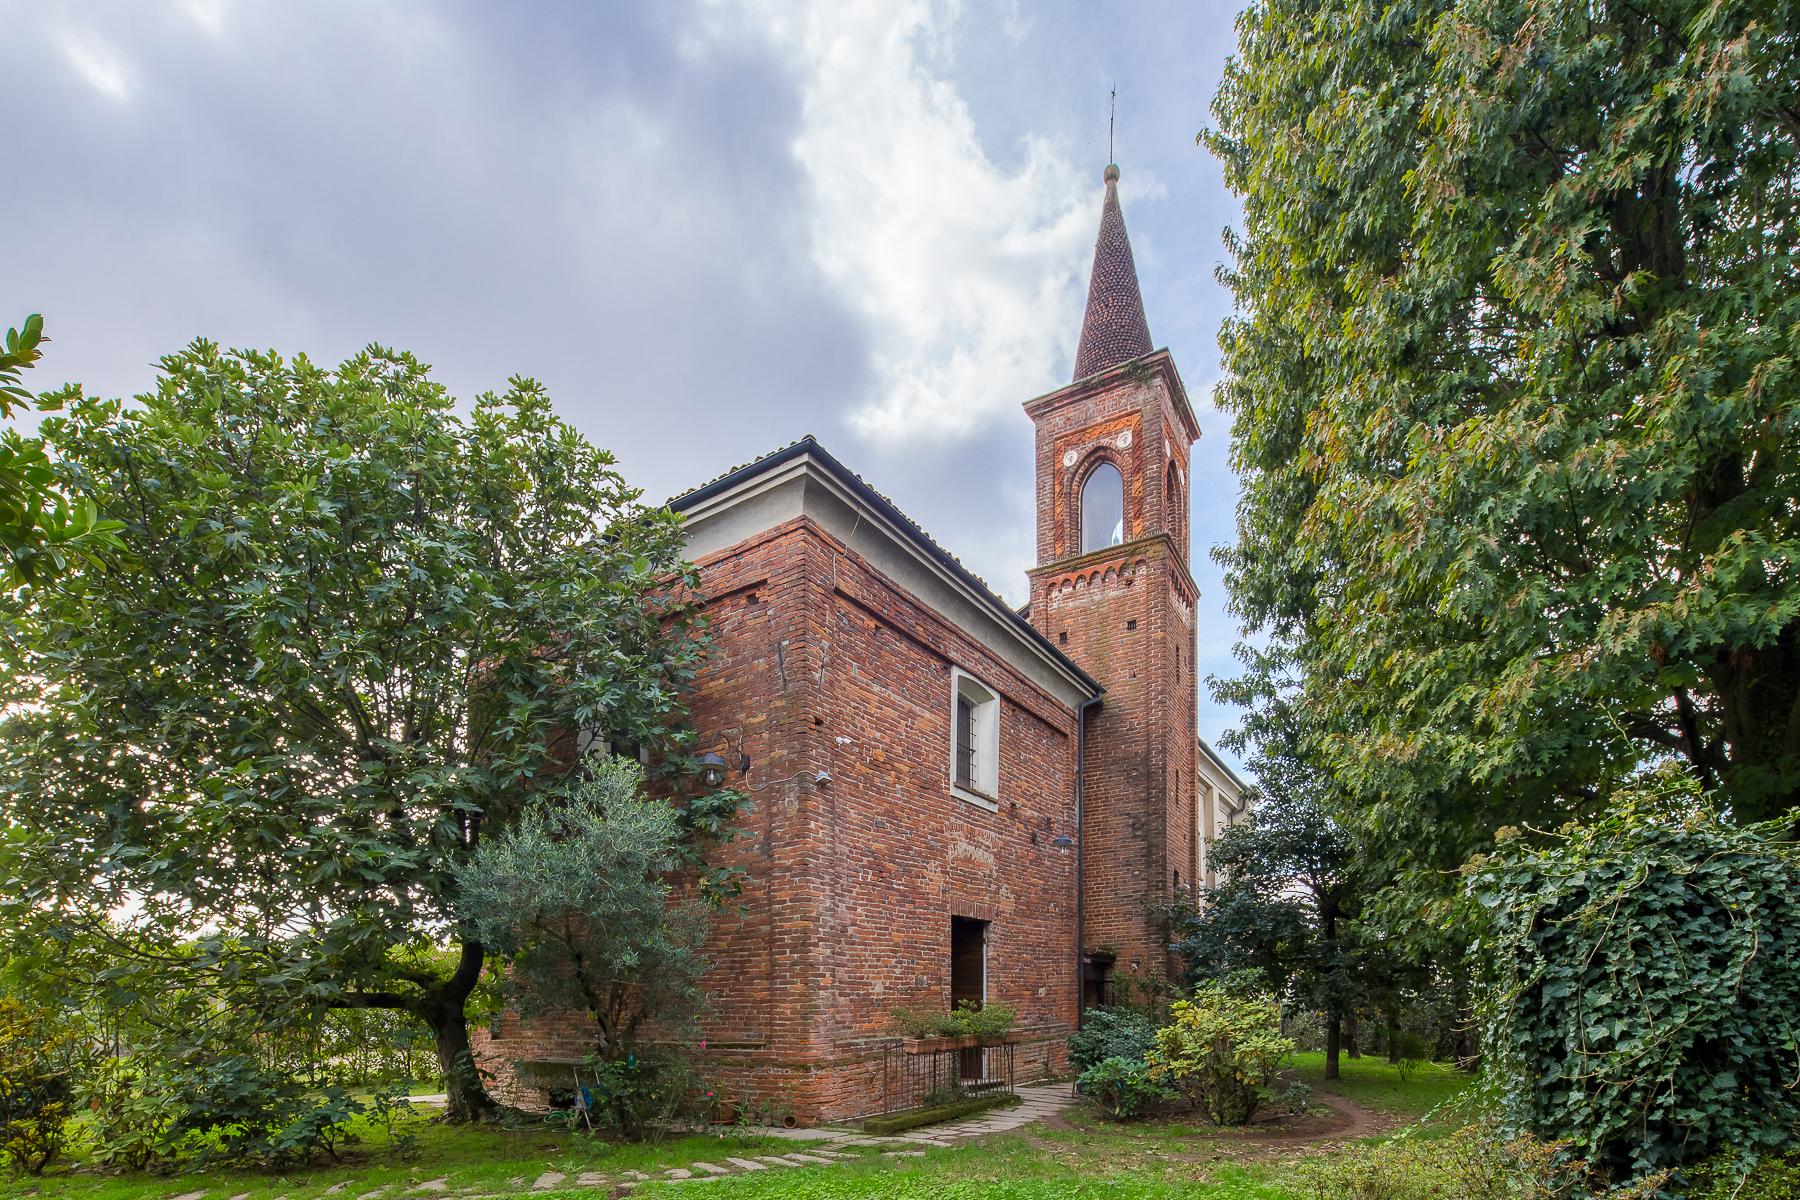 Sophisticated deconsecrated church, used as a dwelling, with garden - 1